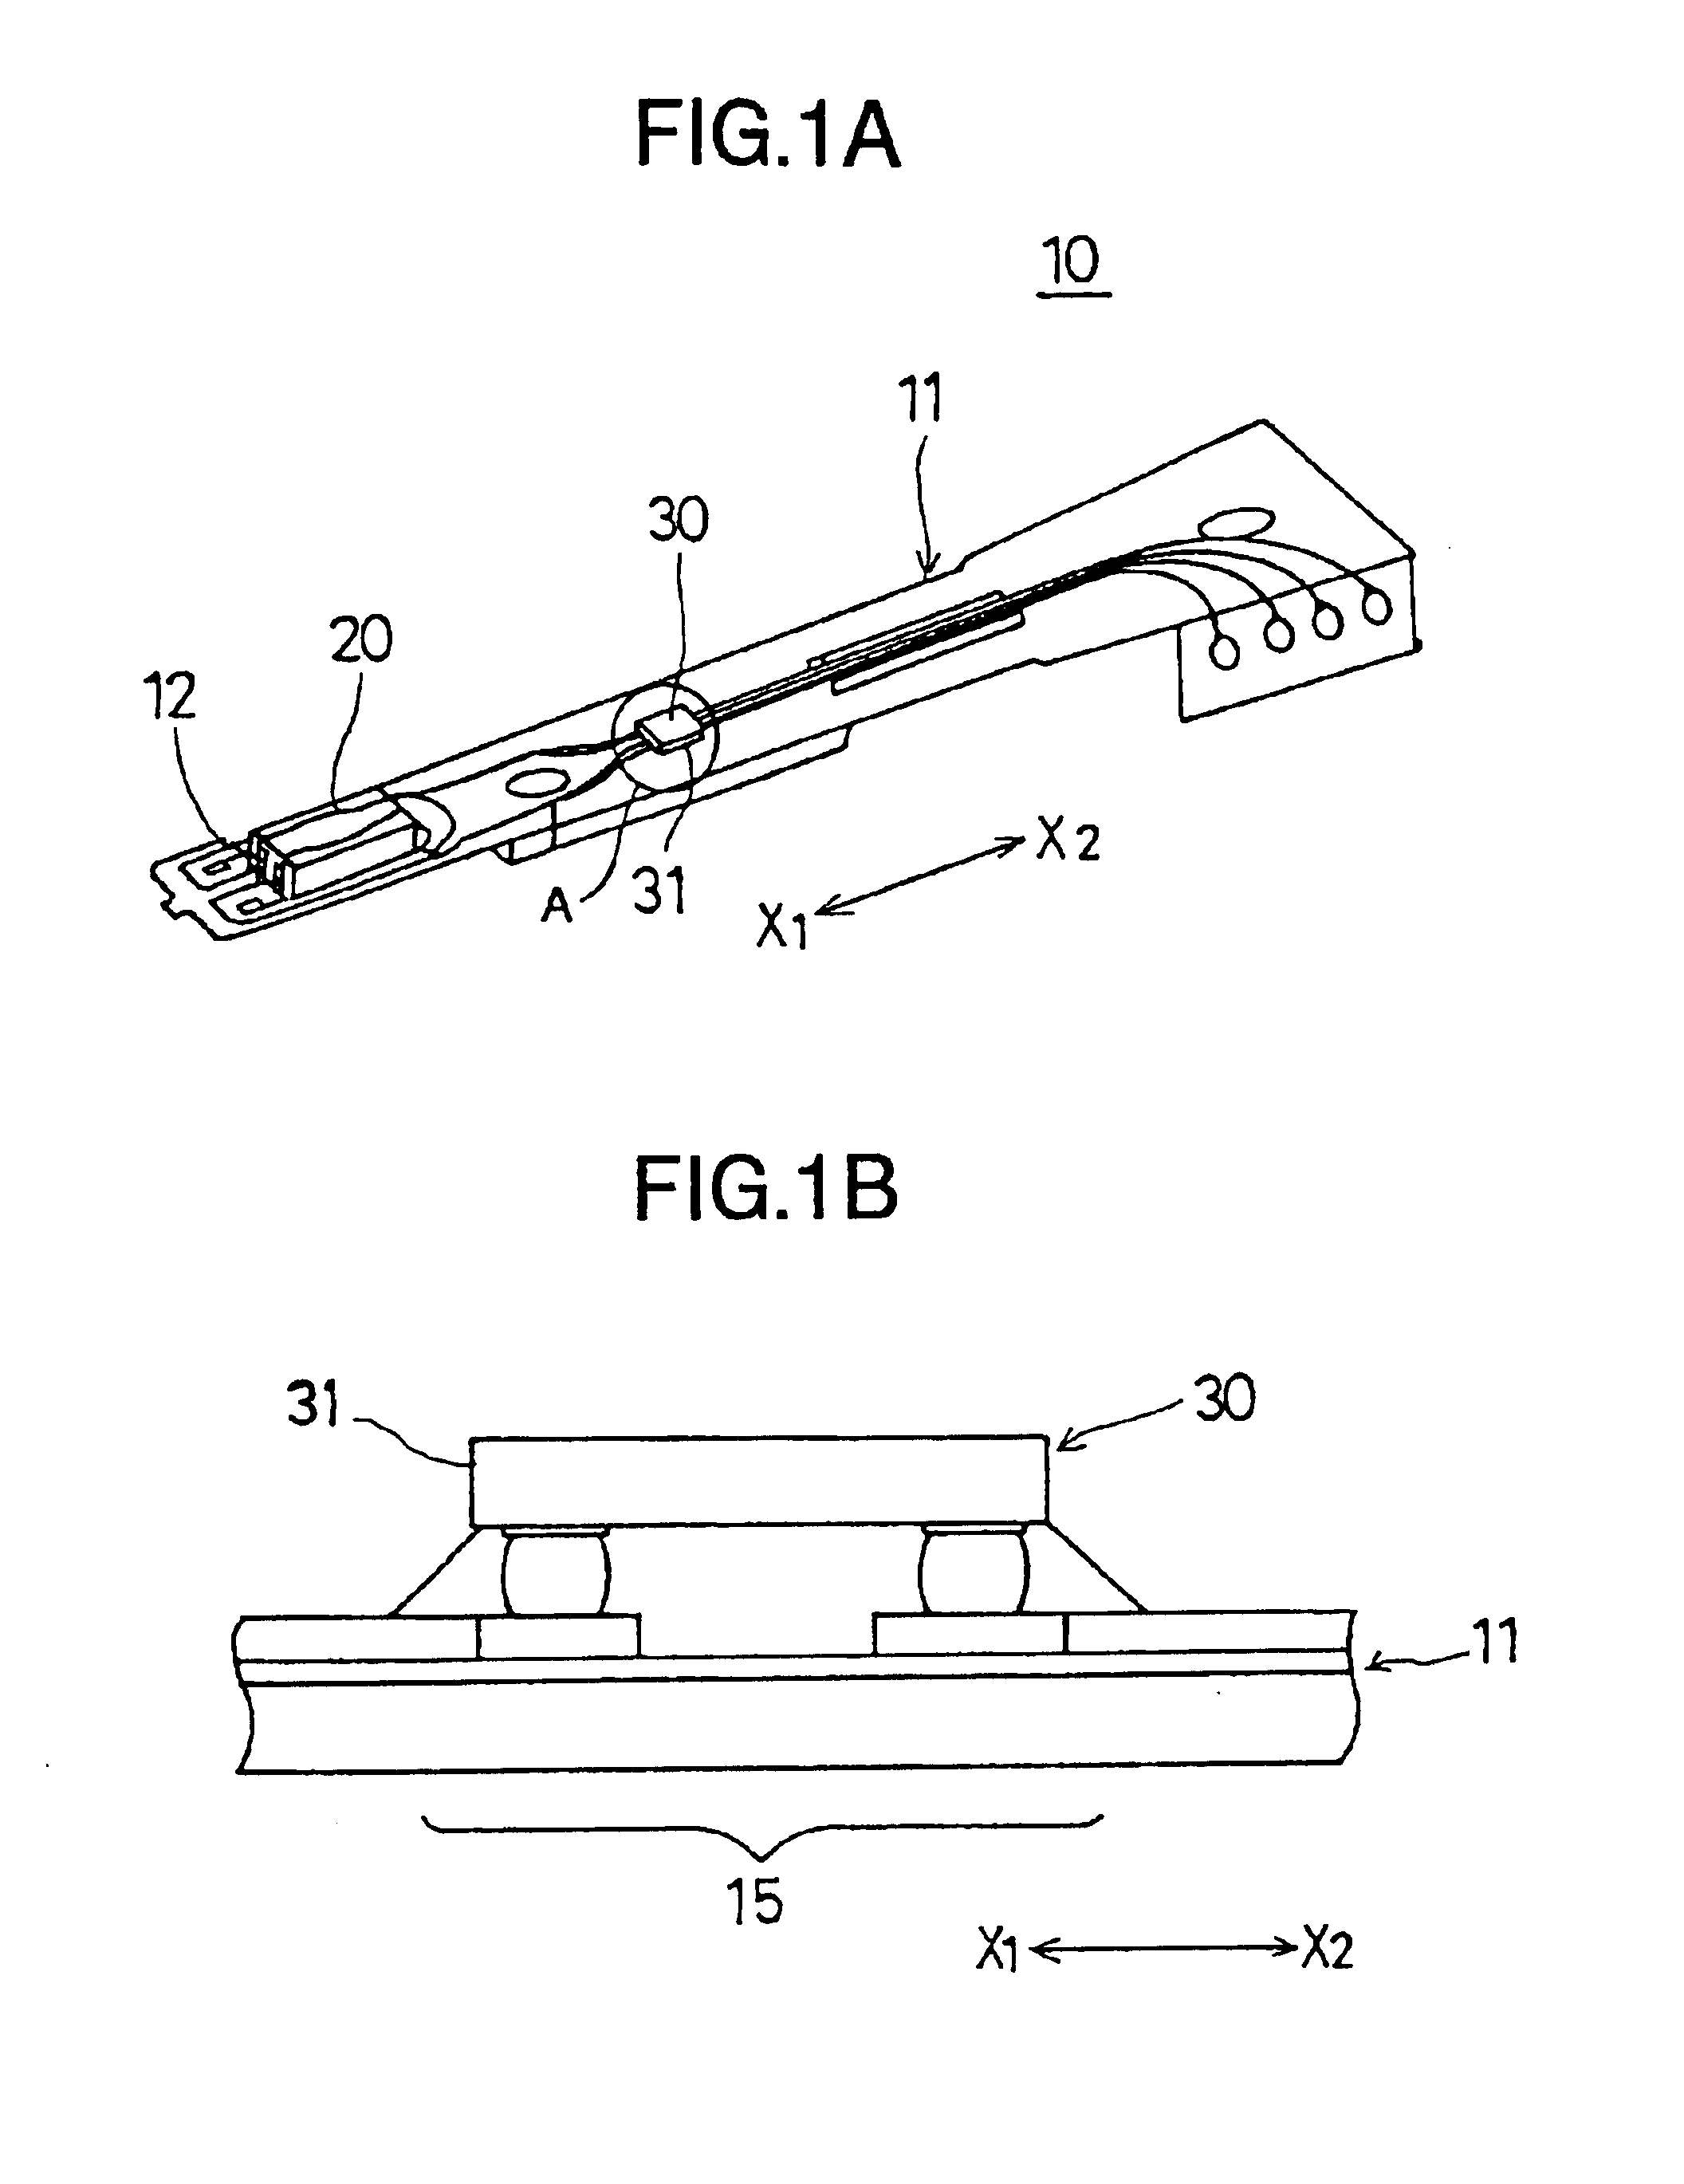 Head assembly having integrated circuit chip covered by layer which prevents foreign particle generation